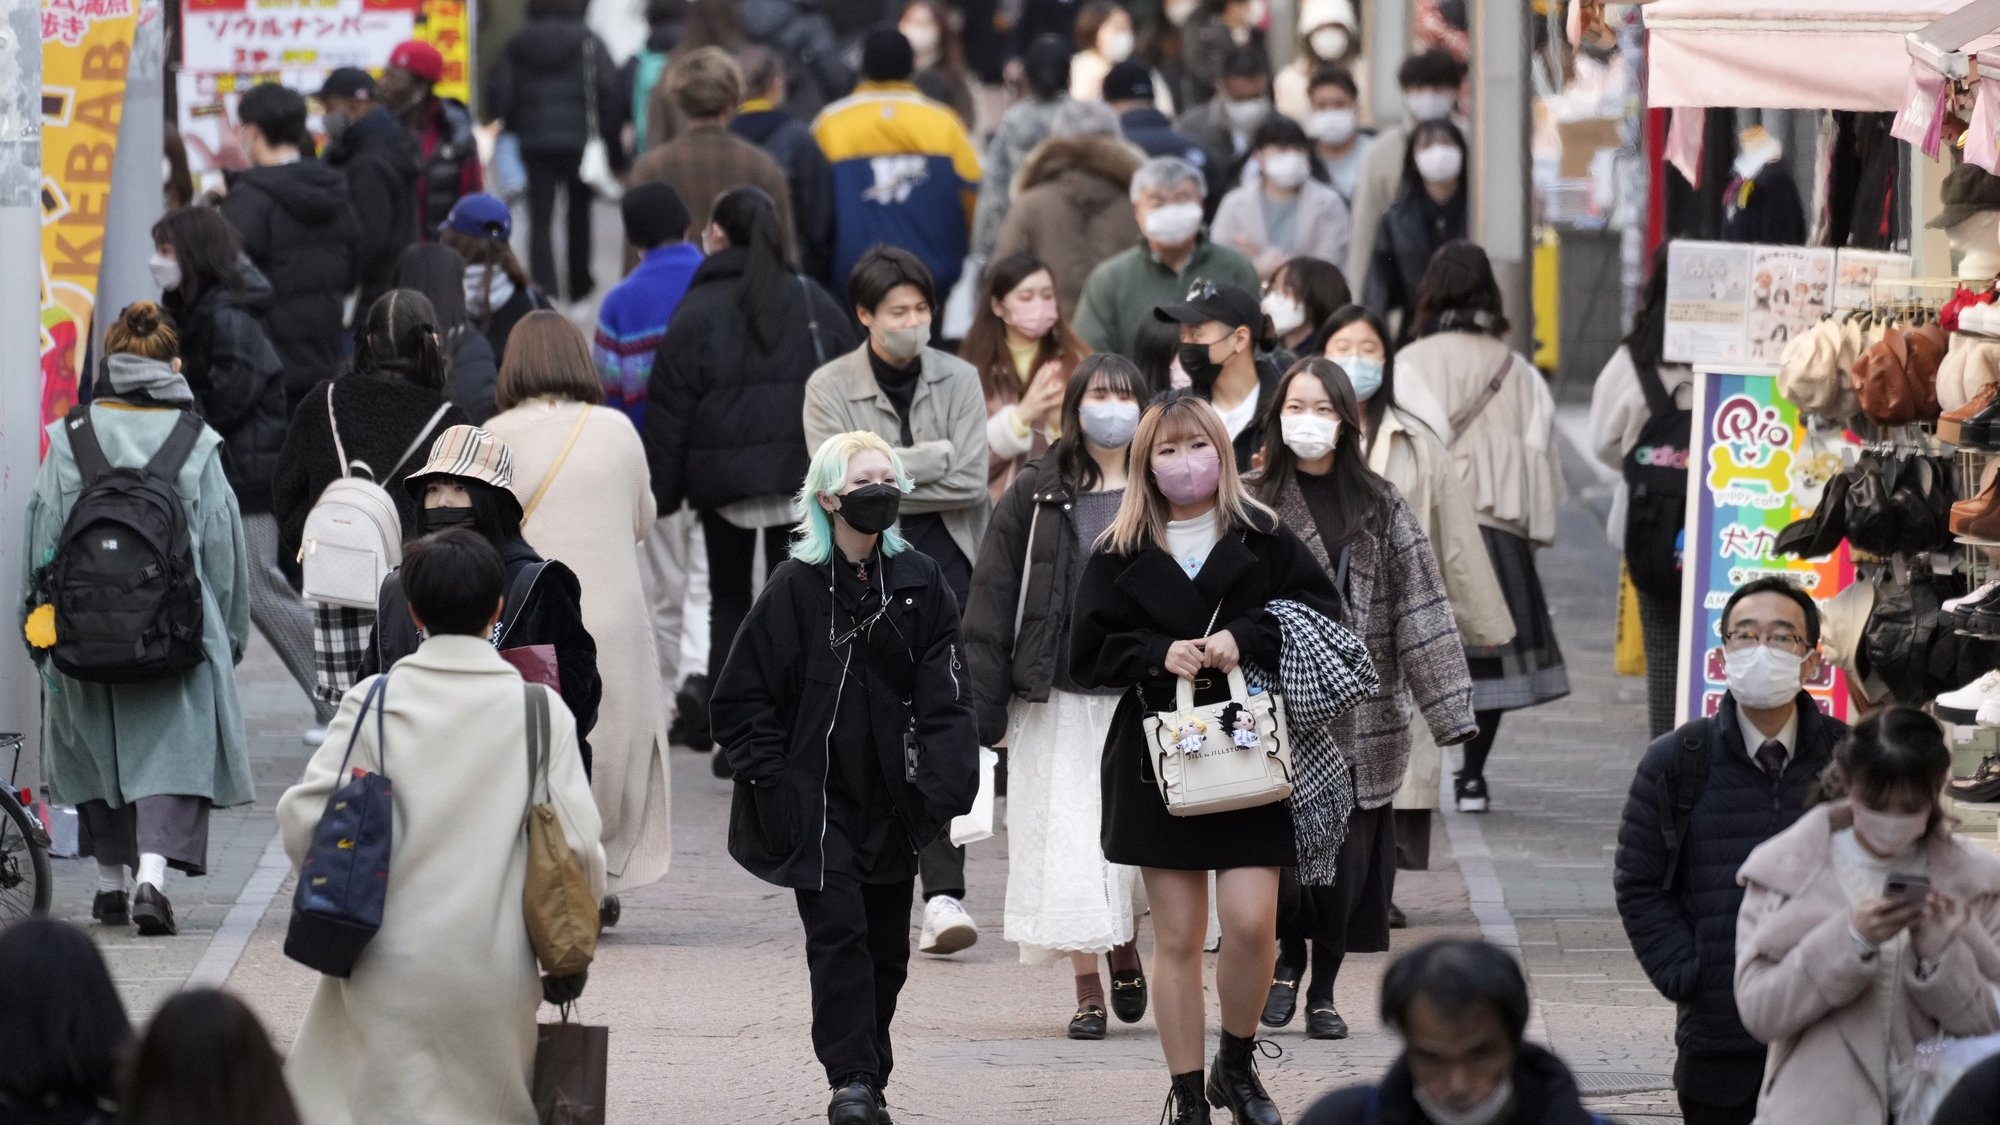 epa09724527 Pedestrians wearing protective face masks crowd a street at the Omotesando fashion district in Tokyo, Japan, 03 February 2022. Japan confirmed the number of daily coronavirus cases crossed the 100,000 mark for the first time as the Omicron variant is spreading across the country. Also, the total number of people infected with the coronavirus in Japan since the start of the pandemic has exceeded 3 million.  EPA/FRANCK ROBICHON